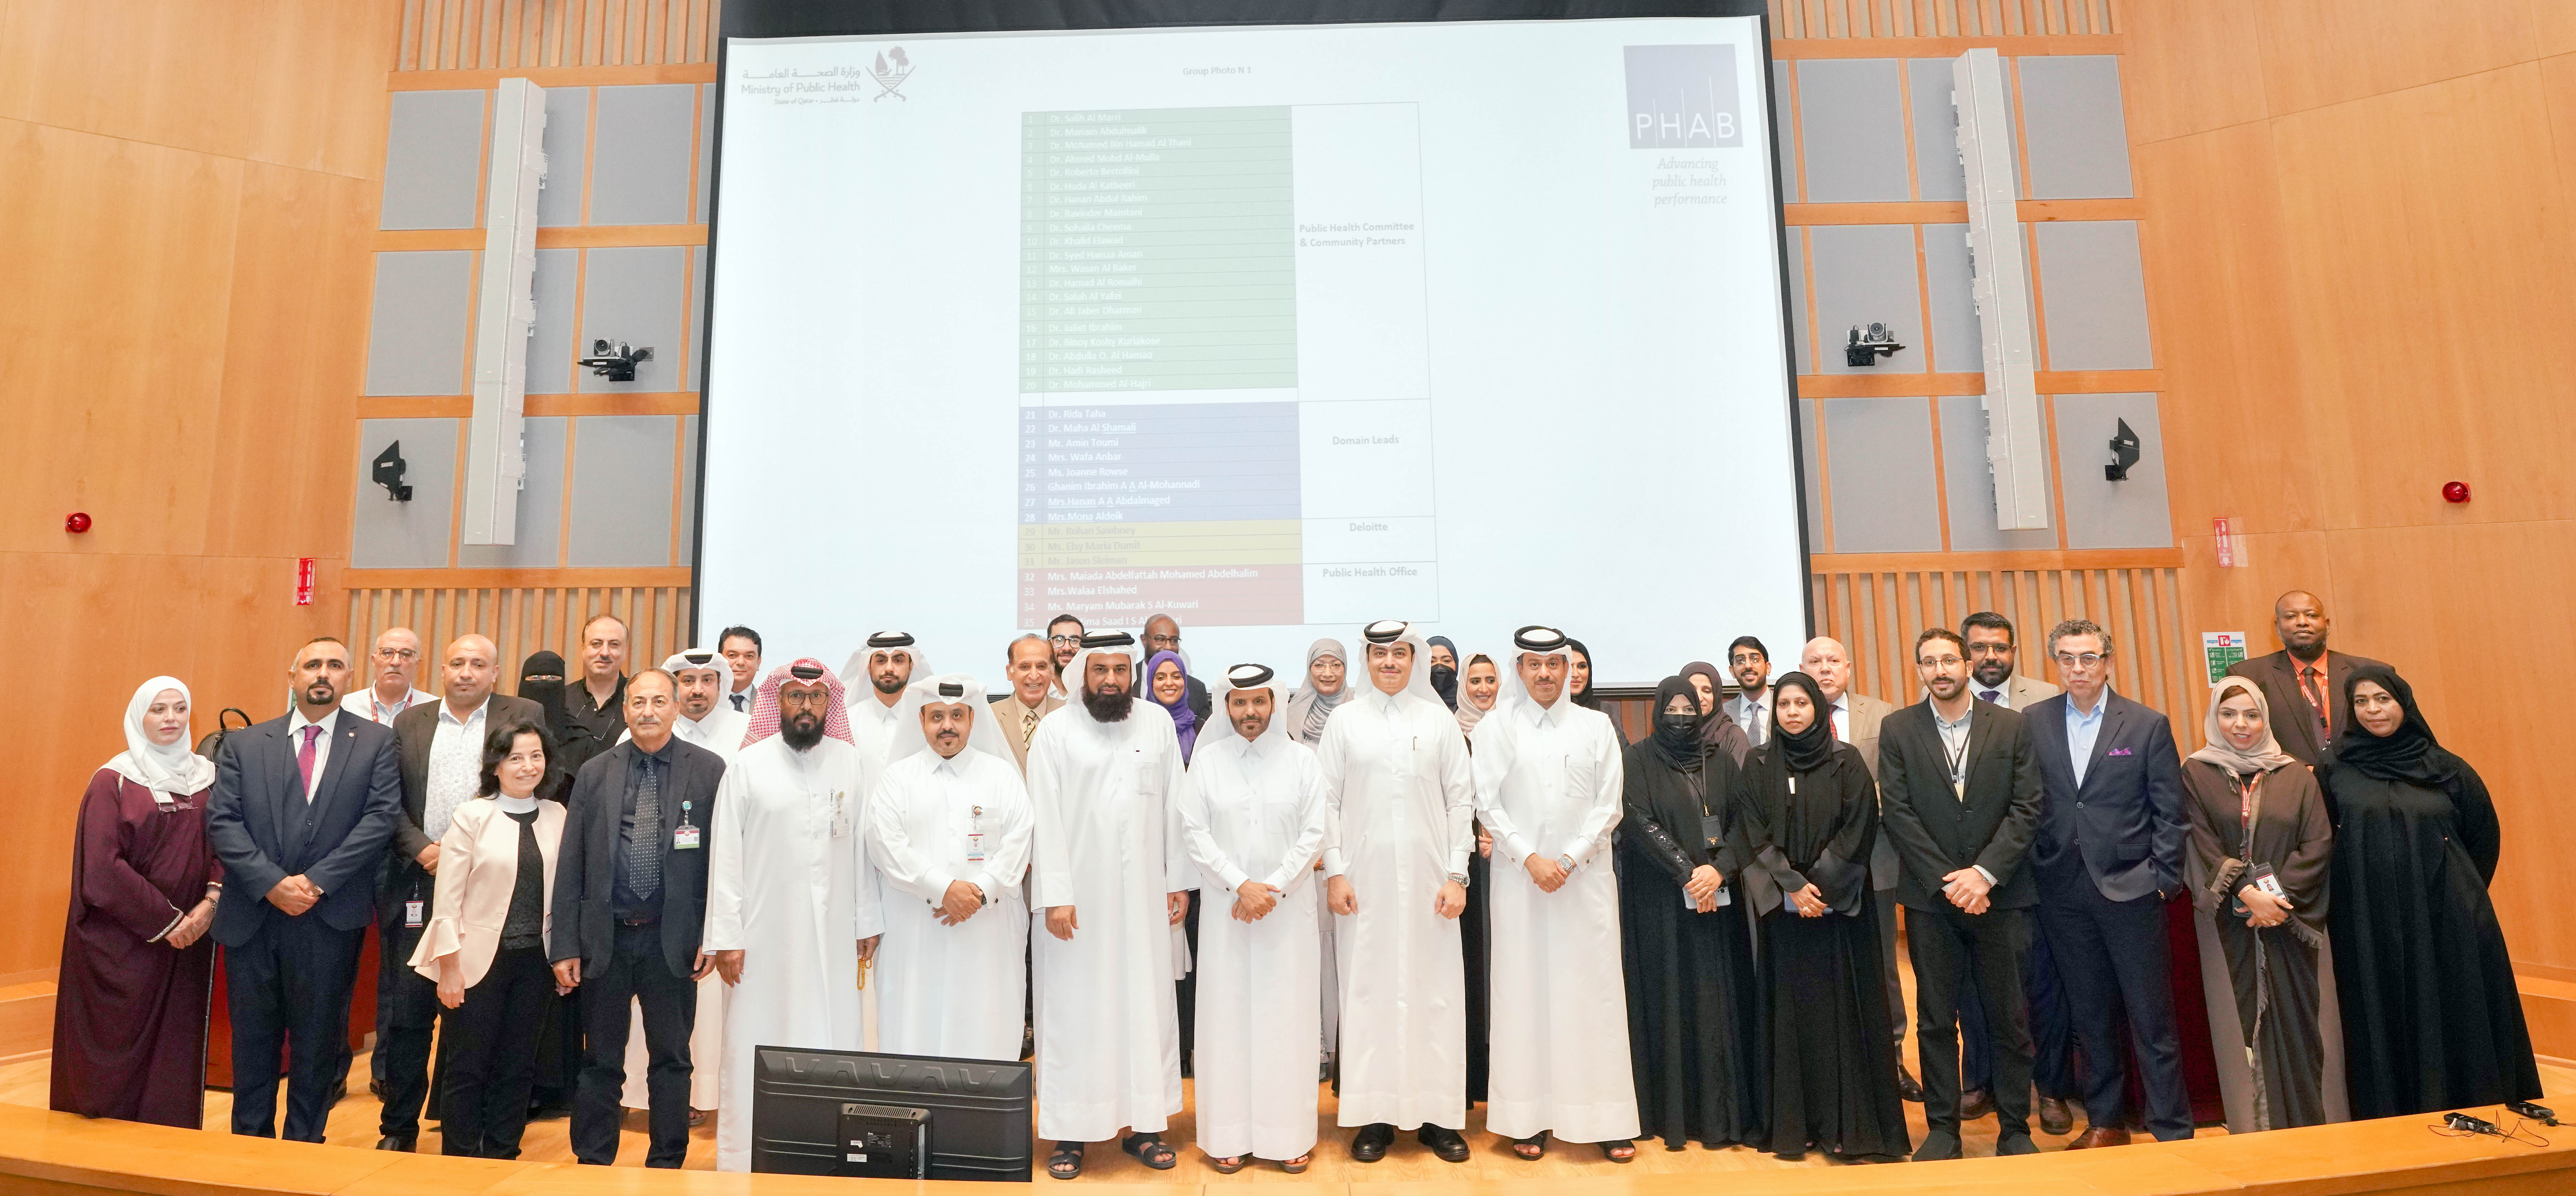 MOPH Awards Participants in the Accreditation of Public Health Services in Qatar​​